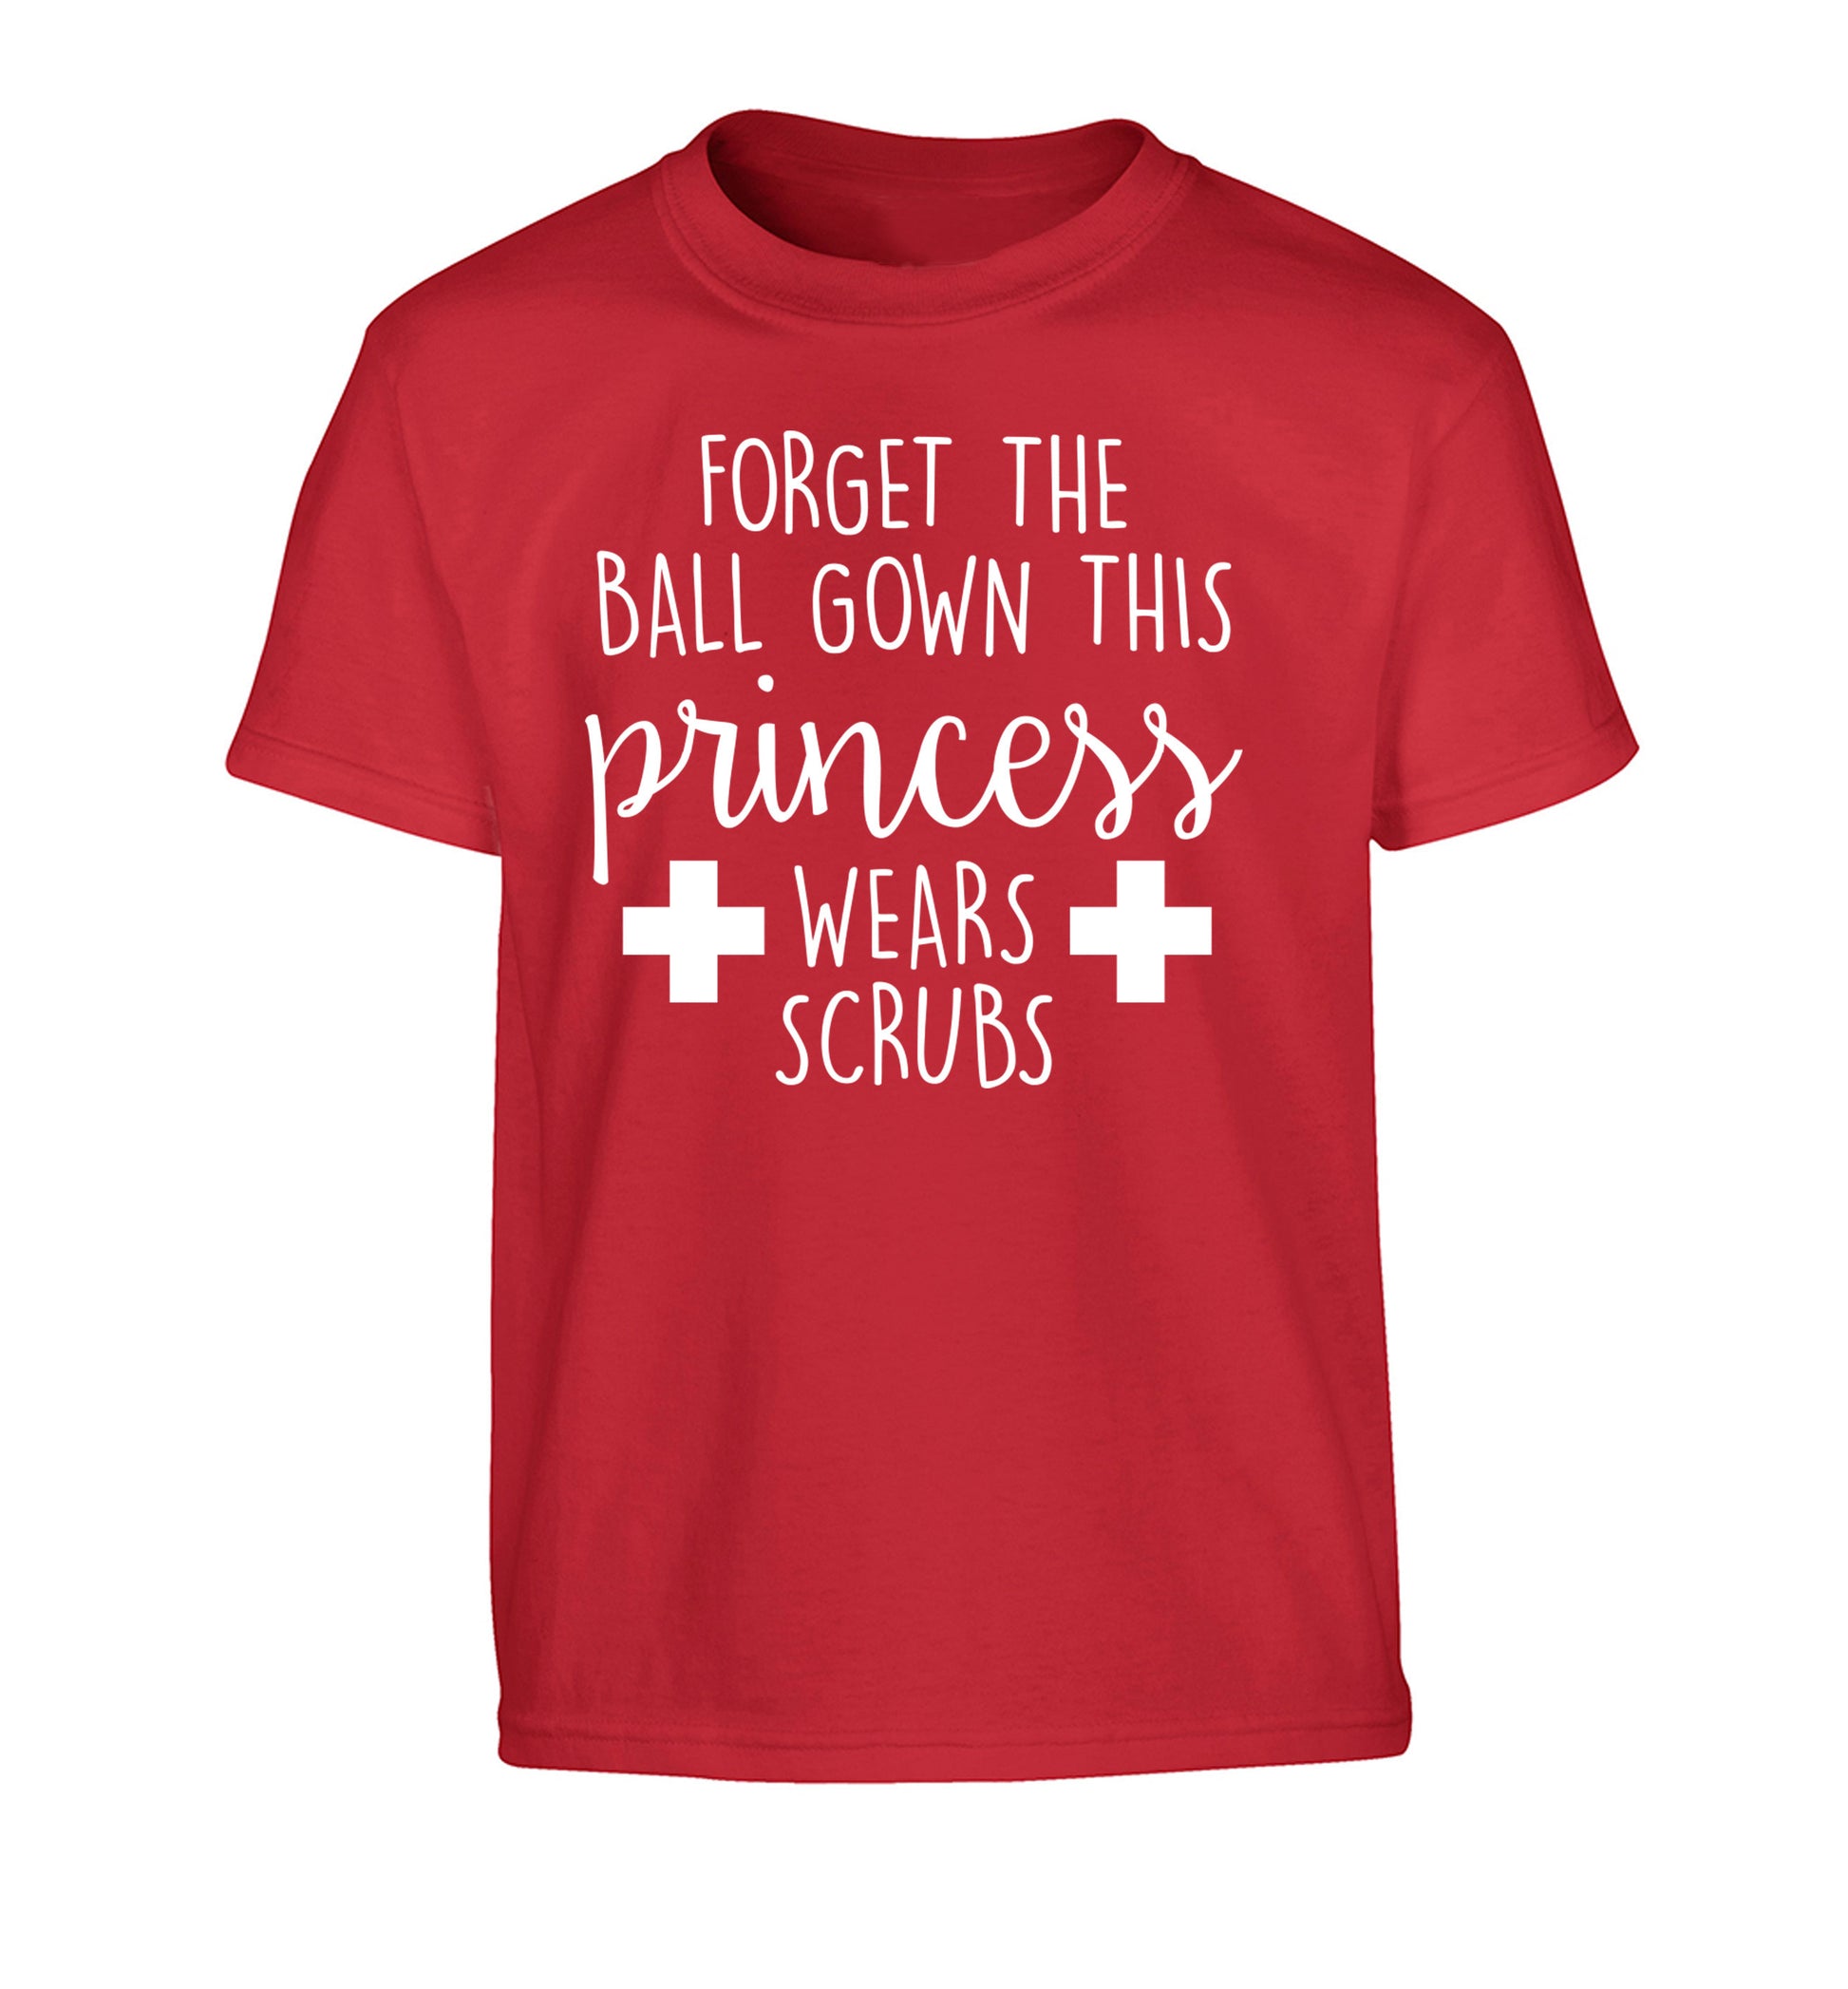 Forget the ball gown this princess wears scrubs Children's red Tshirt 12-14 Years